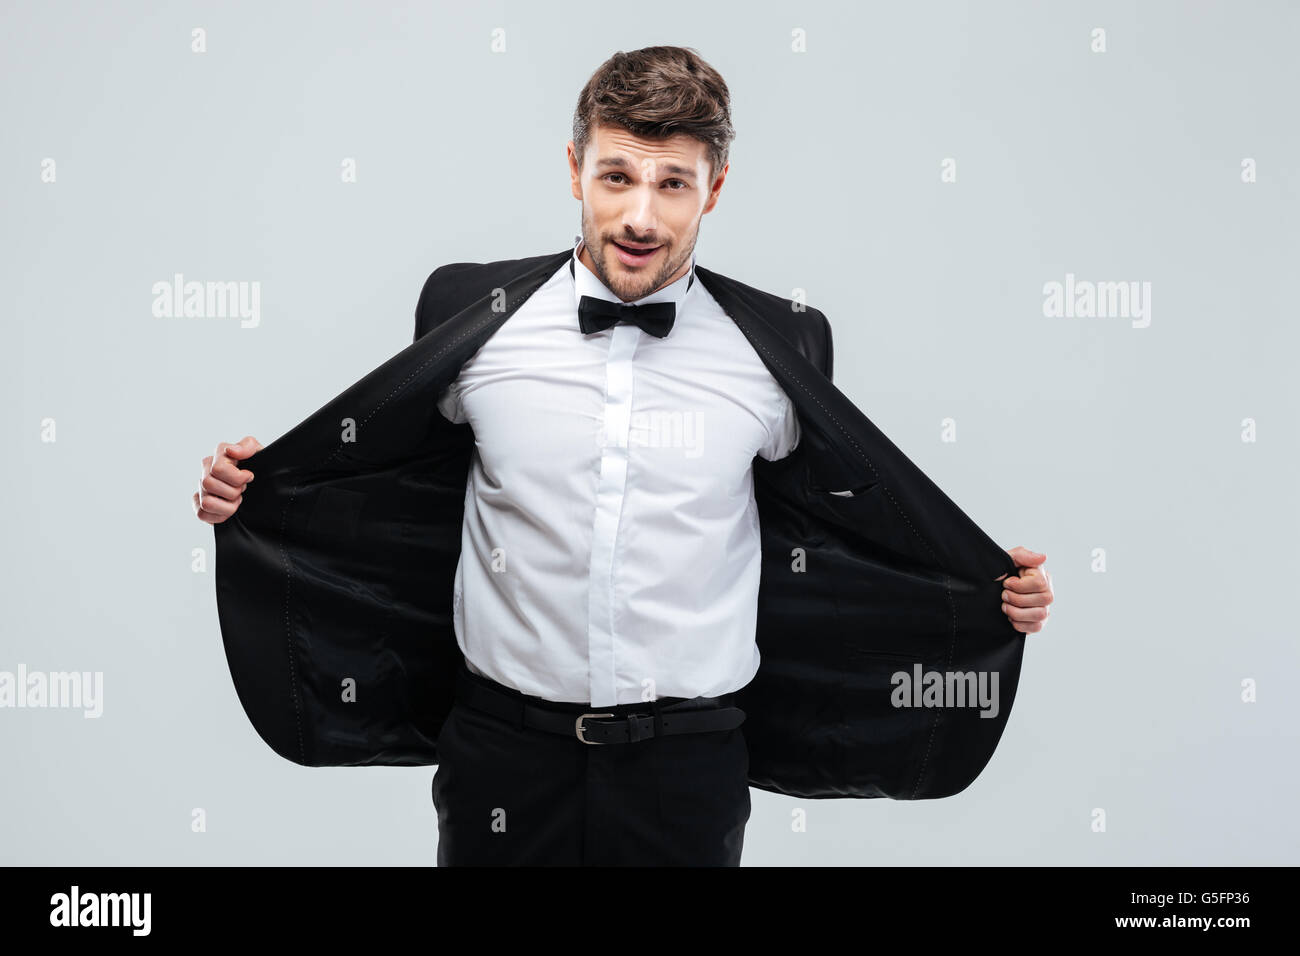 Smiling young man in tuxedo with bow tie taking off his jacket Stock Photo